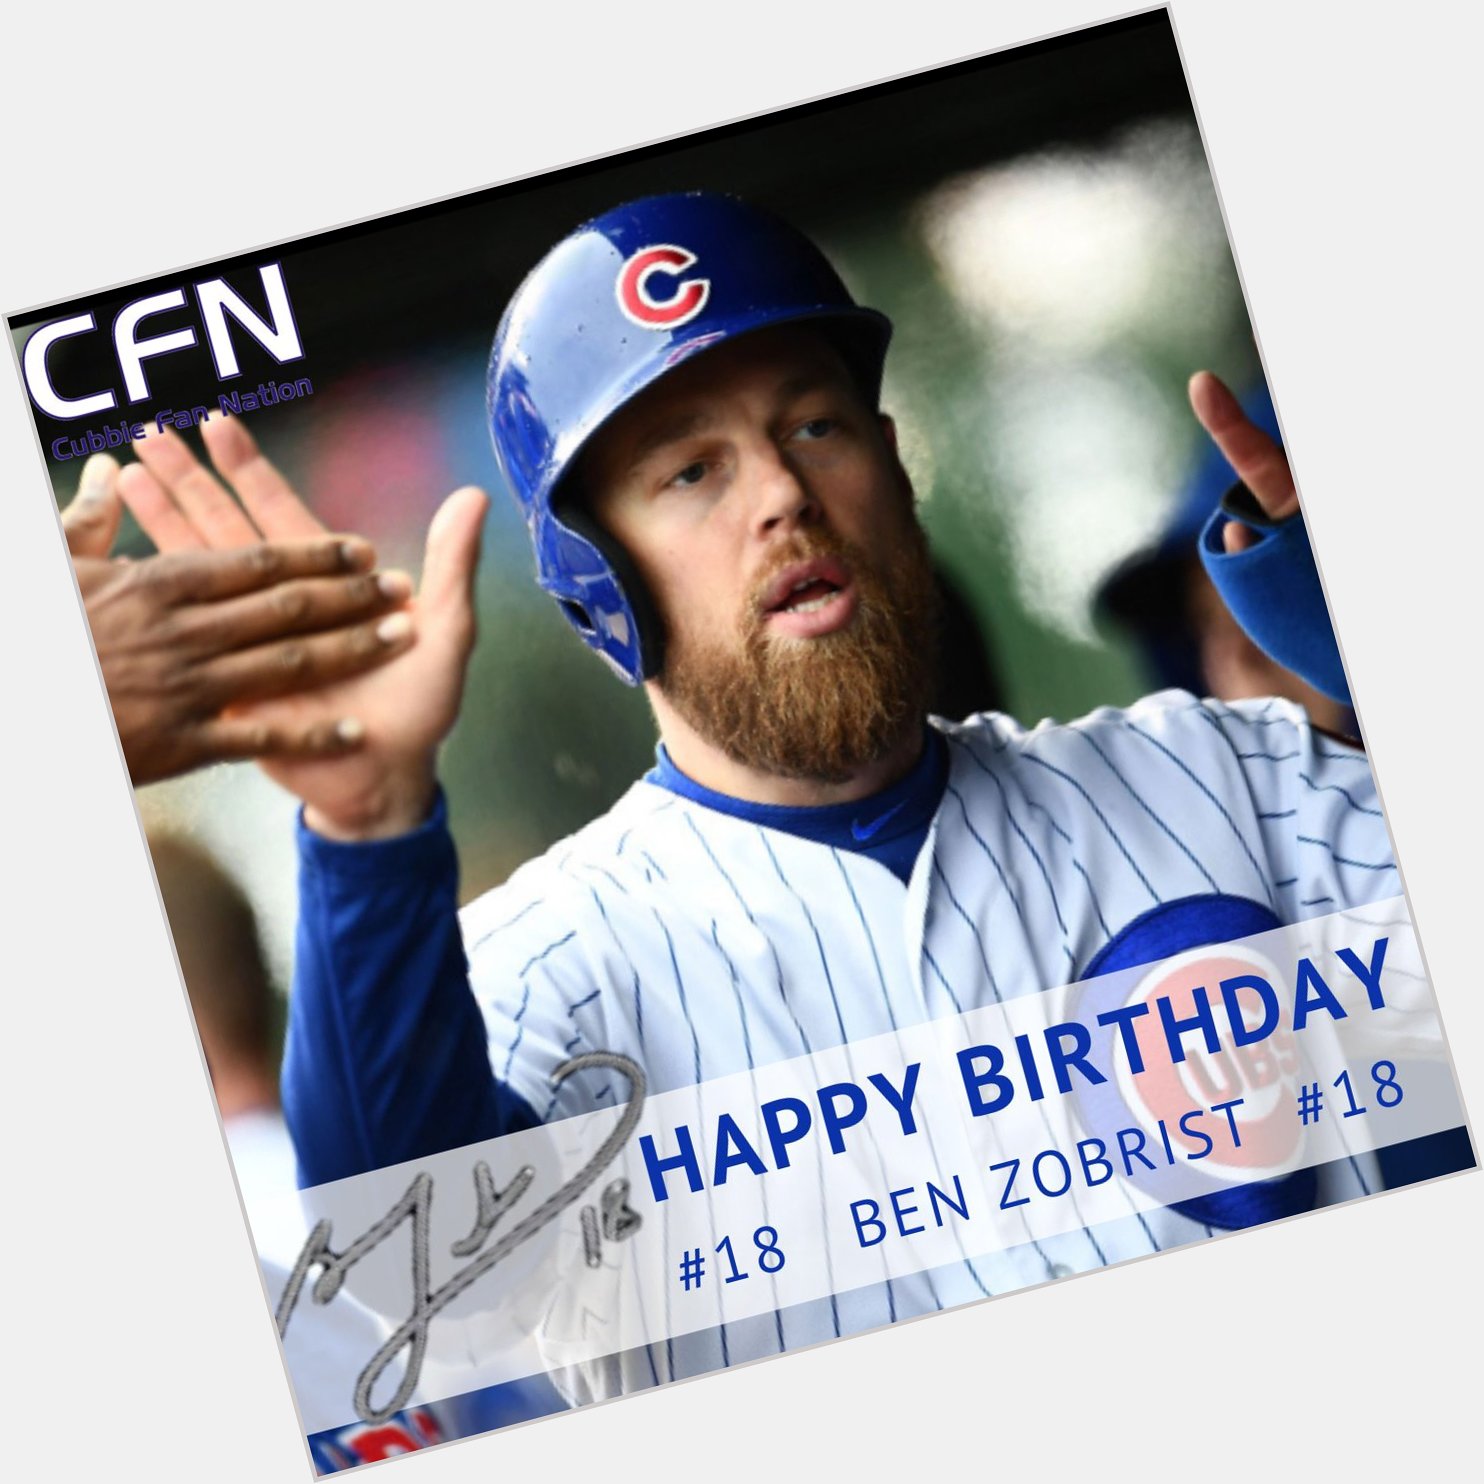 Wishing a very happy birthday to Ben Zobrist! Can t wait to see you back on field cause we miss you! 